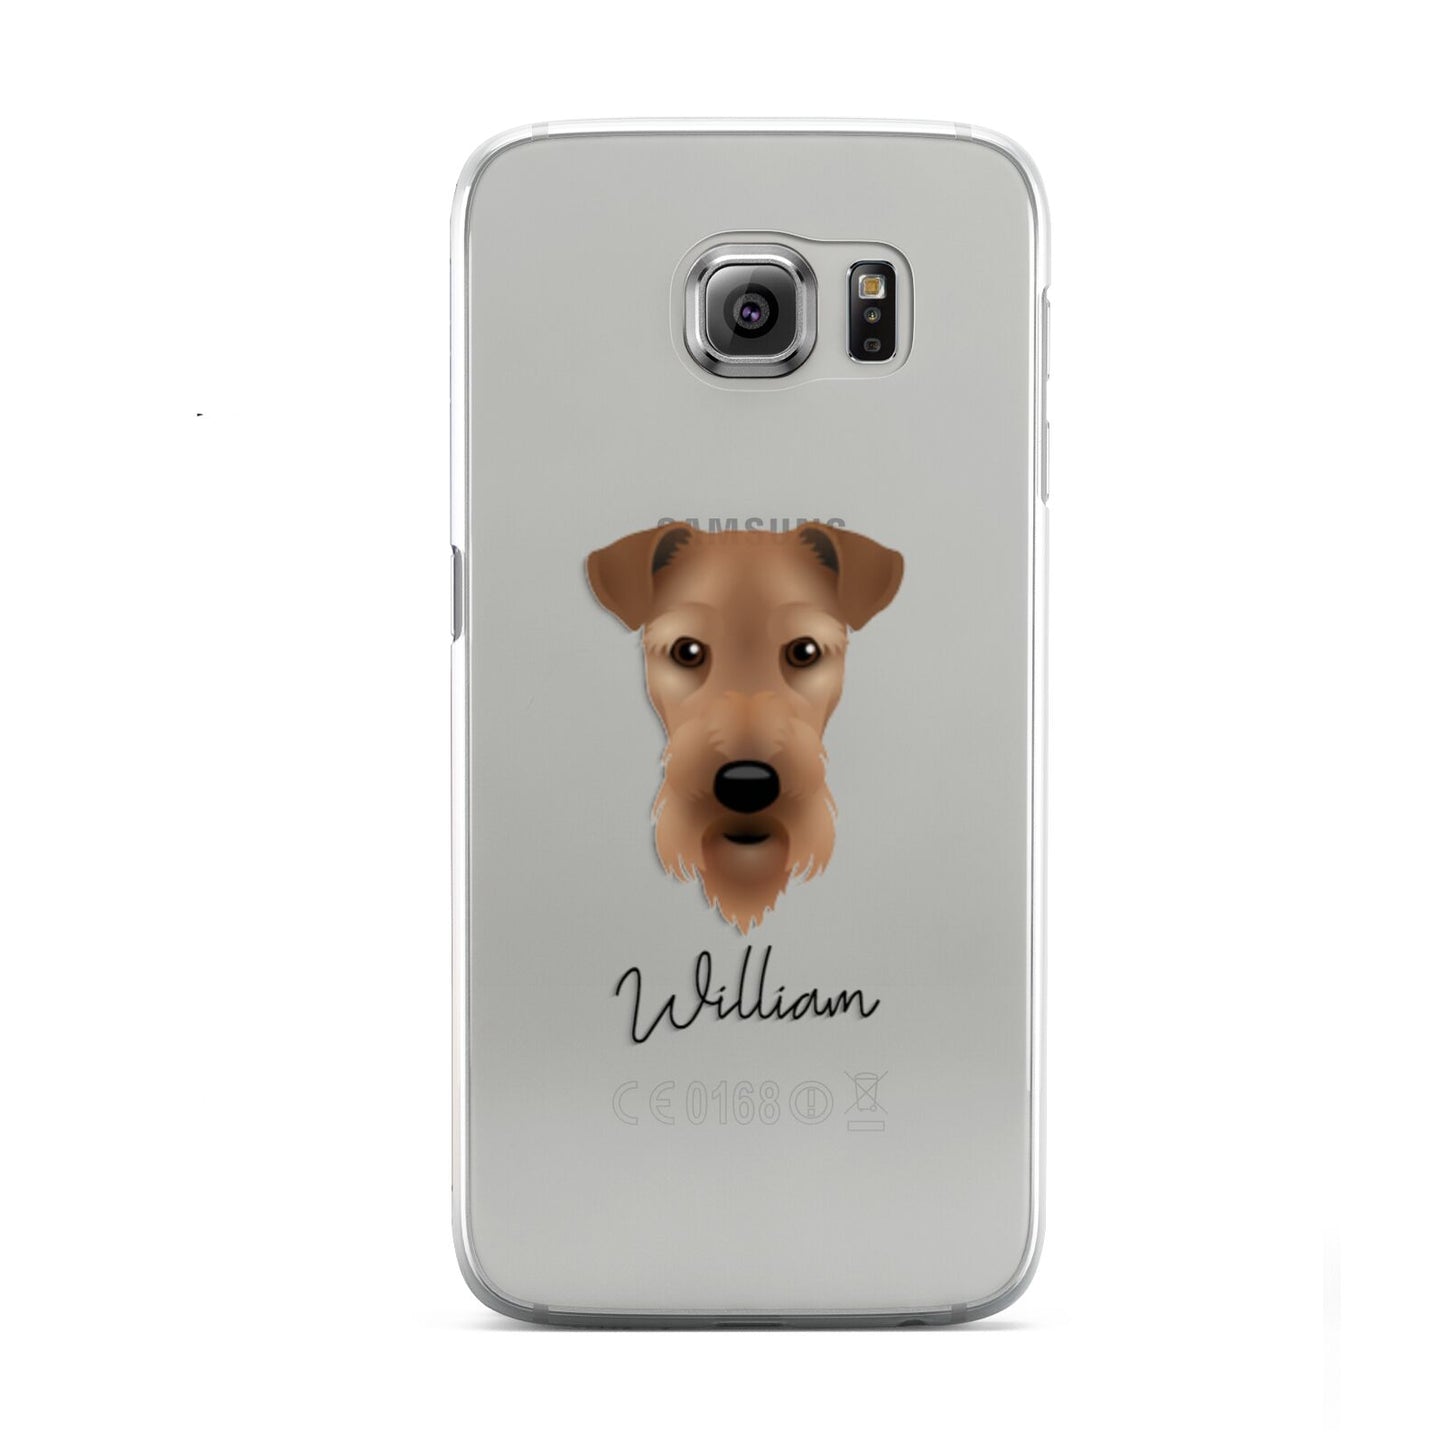 Airedale Terrier Personalised Samsung Galaxy S6 Case